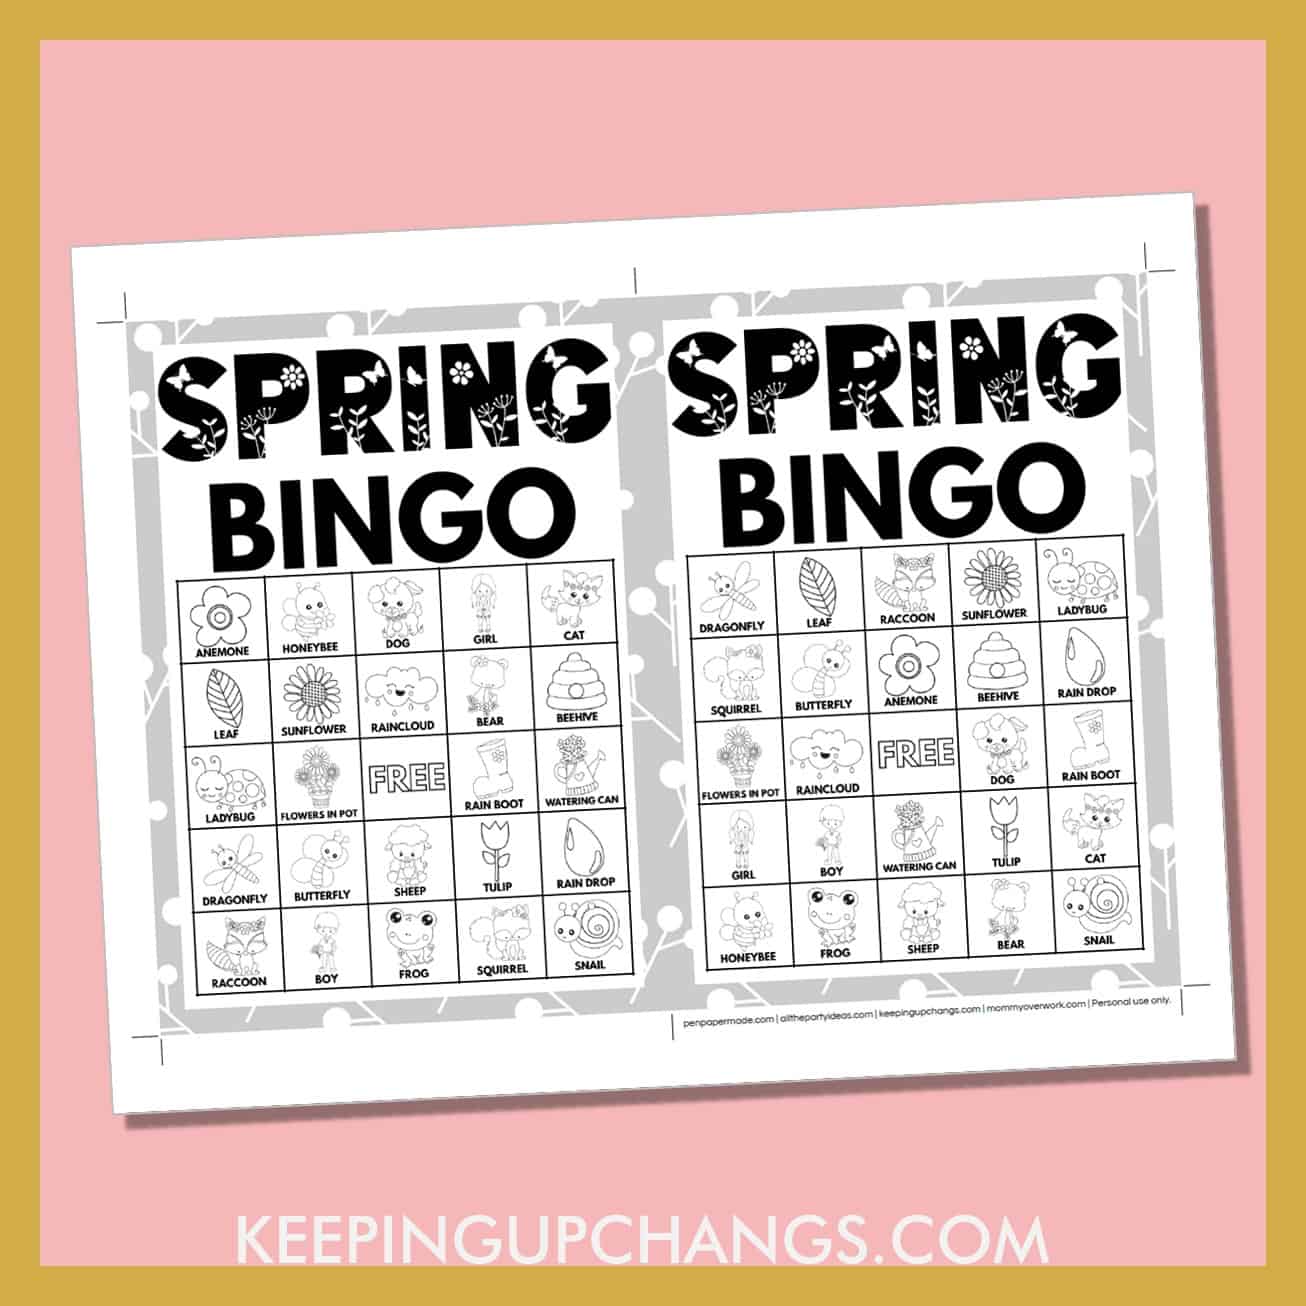 free spring bingo card 5x5 5x7 game boards with black, white images and text words.